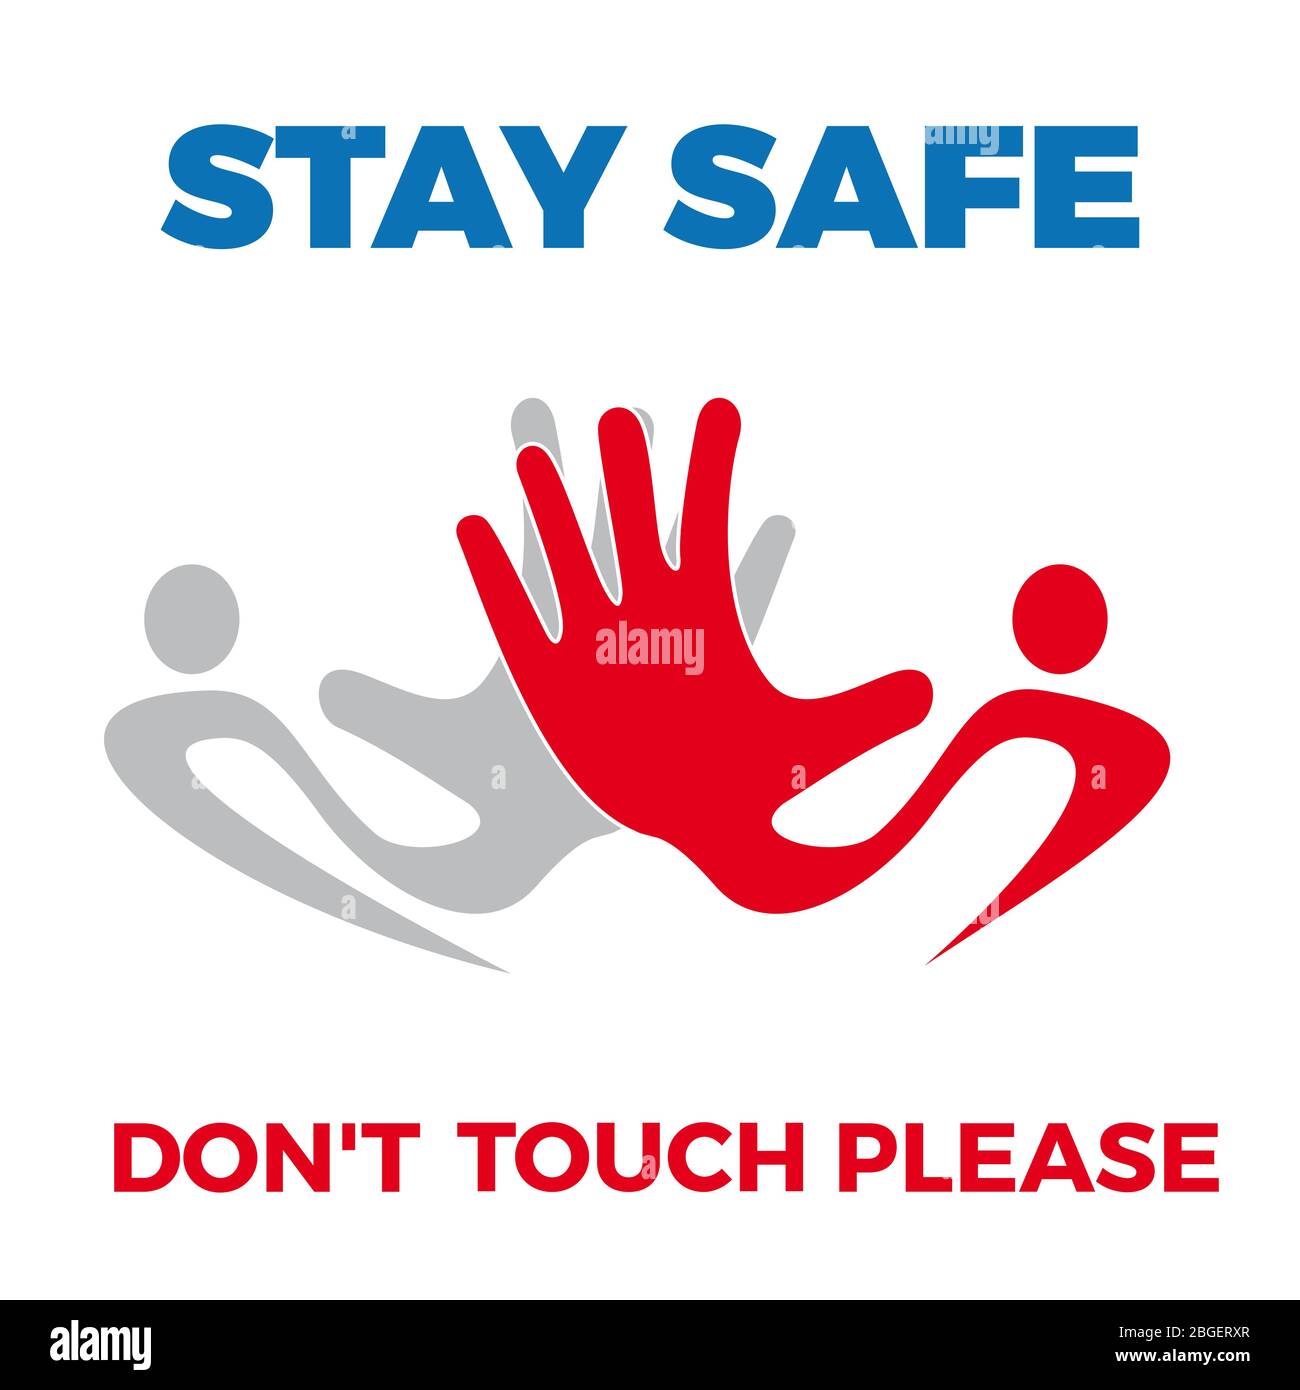 Warning label Coronavirus with hand. Don't touch please, stay safe. Vector illustration Stock Vector